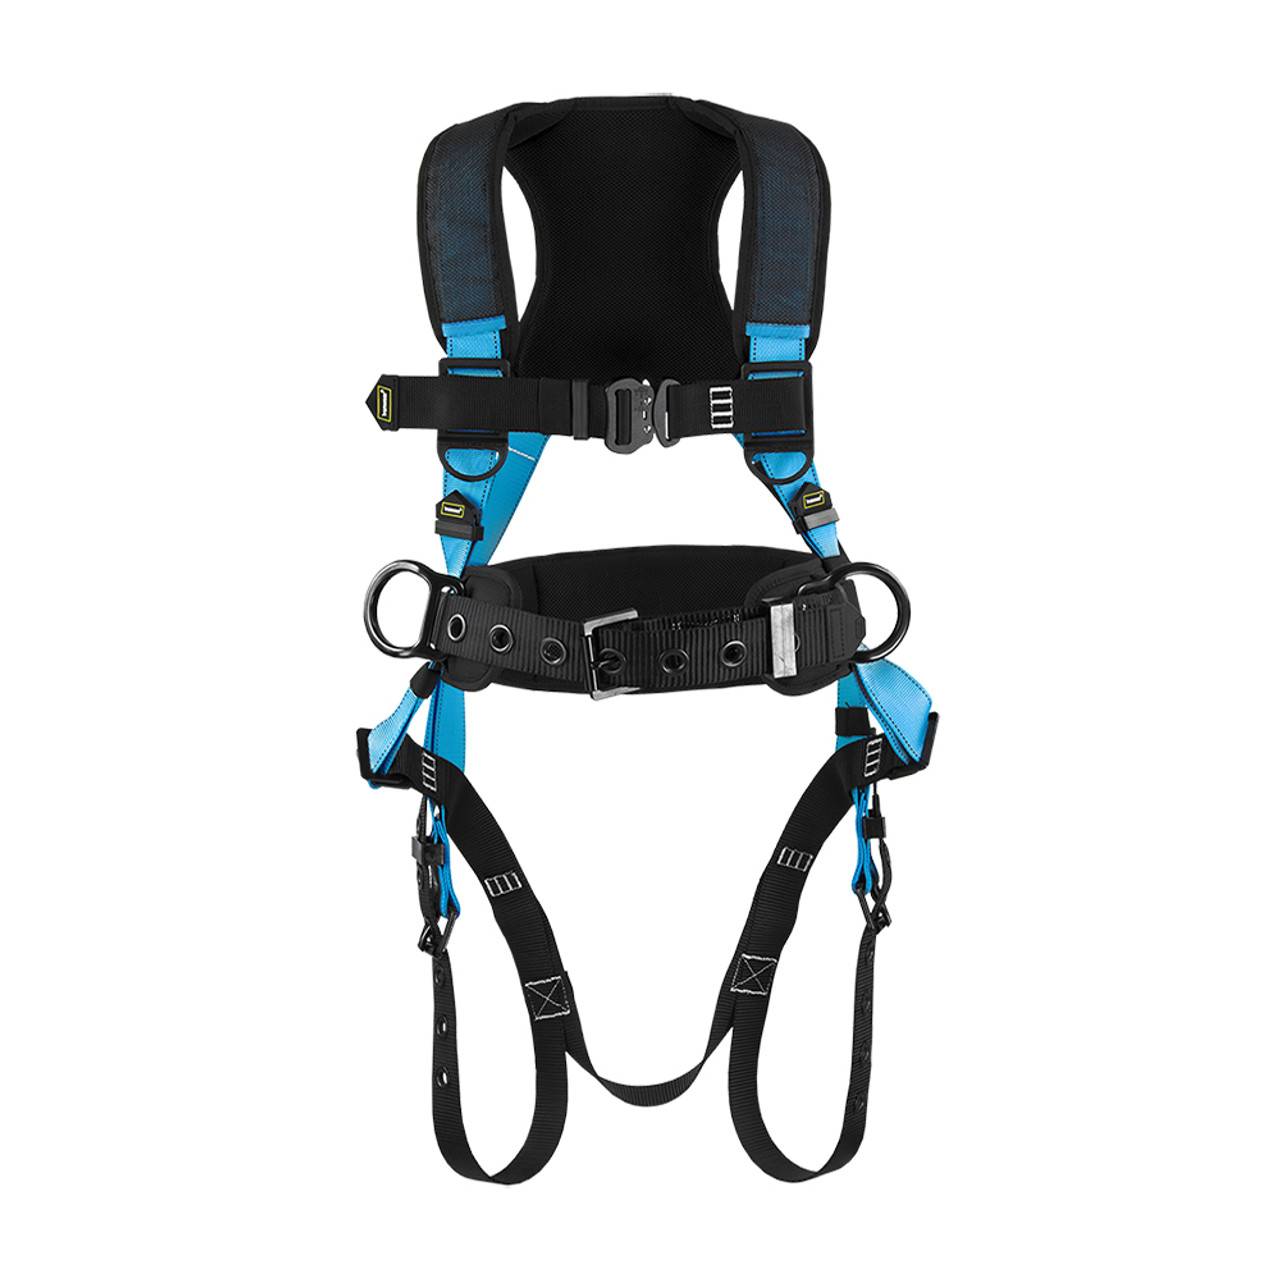 Full Body Premium Harness, Light Weight with Aluminum Quick Connects D-Each  Gryphon Safety Equipment